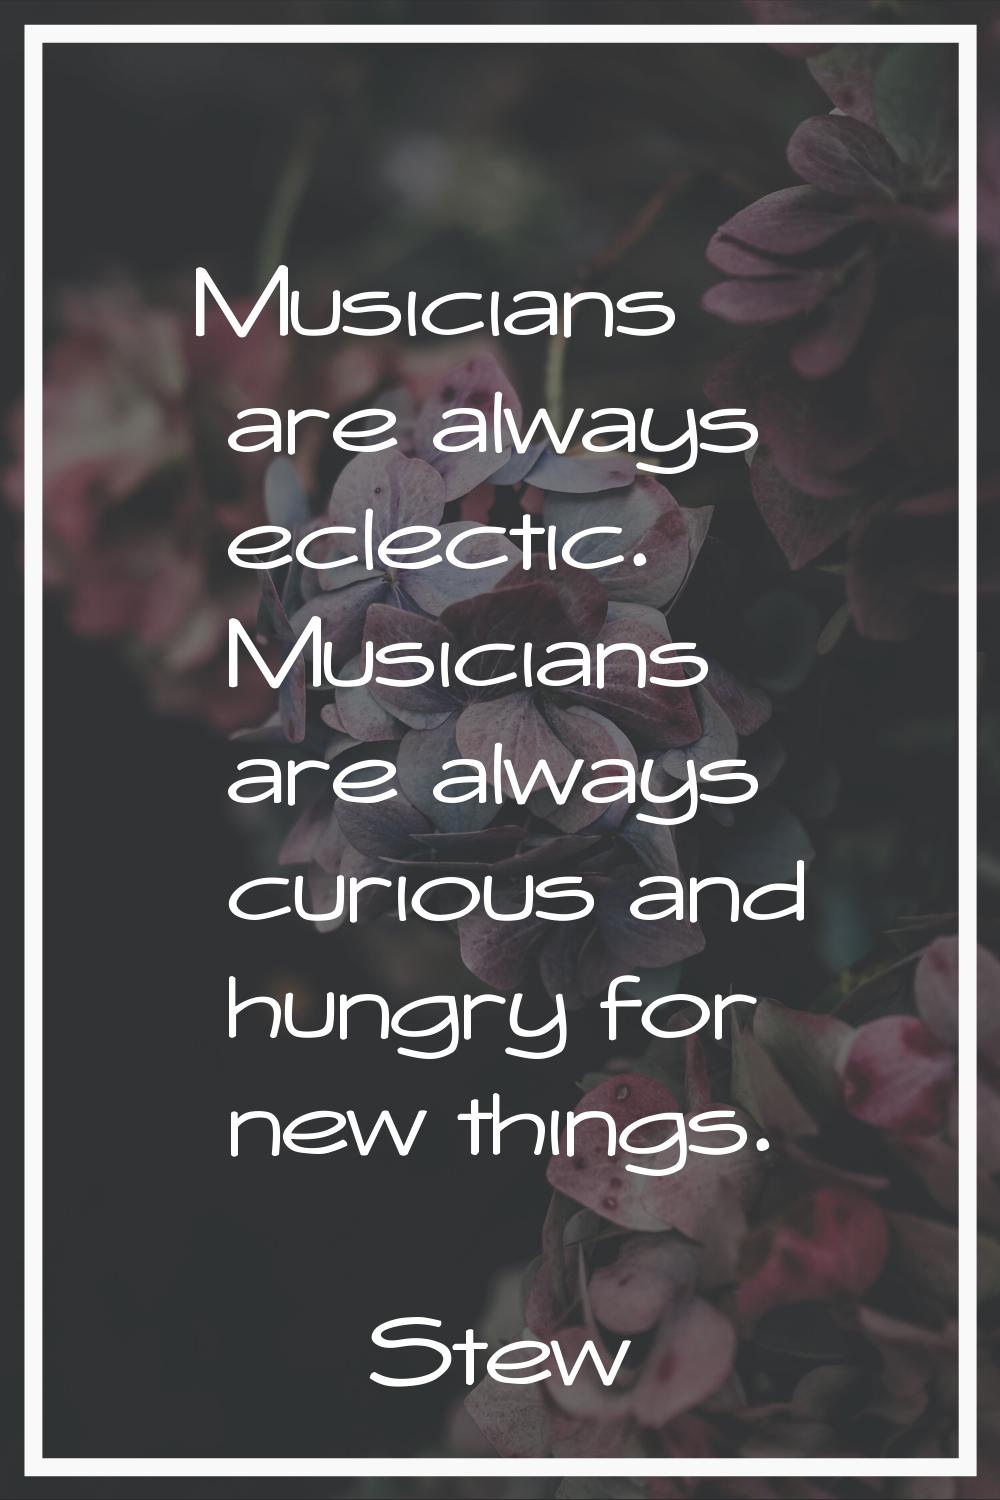 Musicians are always eclectic. Musicians are always curious and hungry for new things.